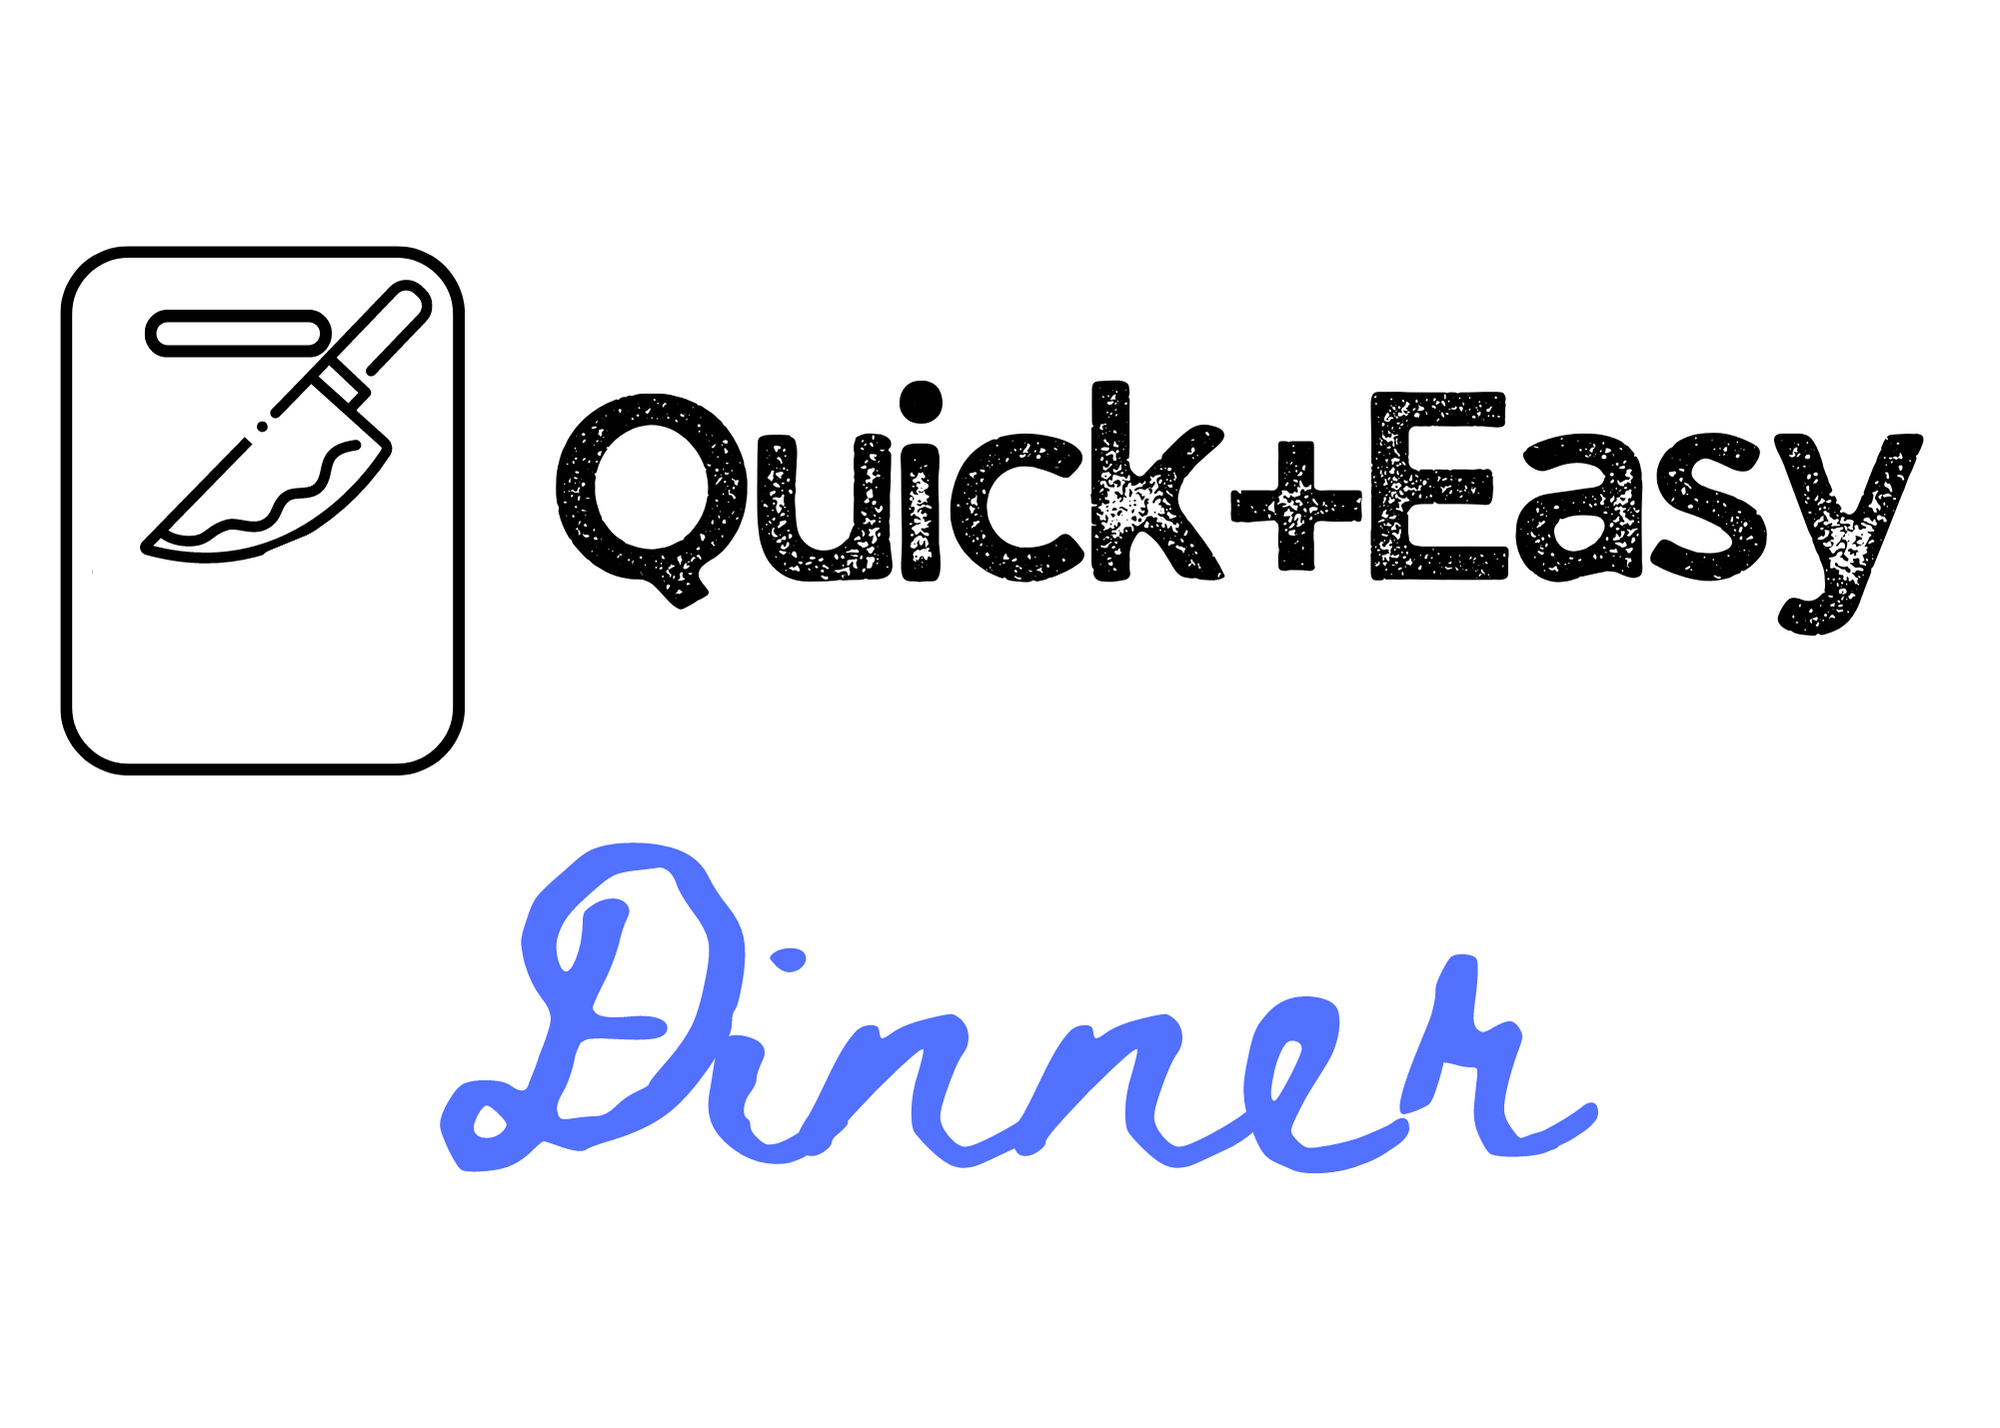 	Quick + Easy Dinner recipe weight loss meal plans	